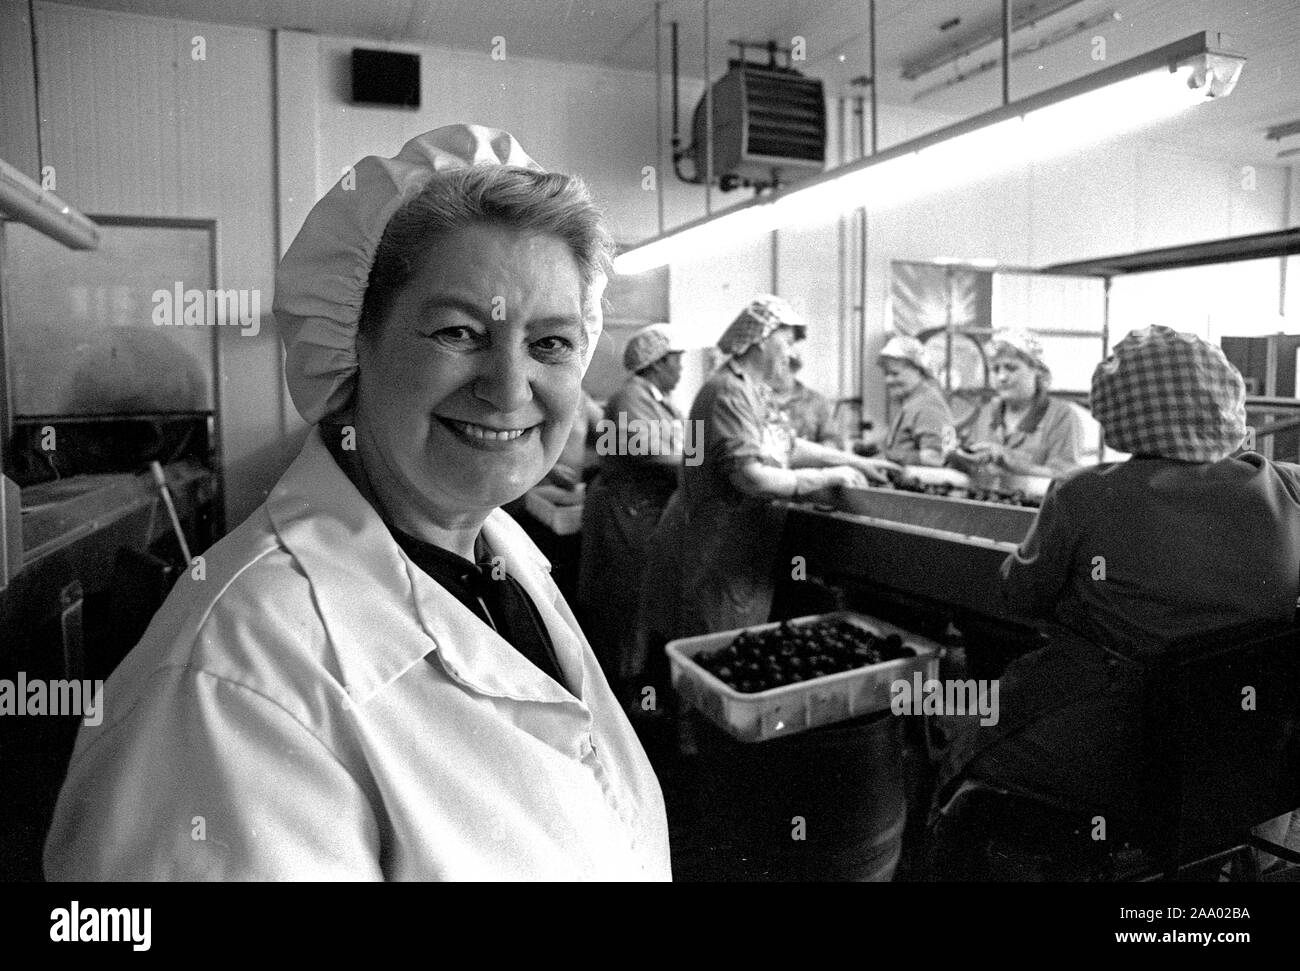 Chocolate confectionery workers on the production line in York, England, Uk 1985 Stock Photo